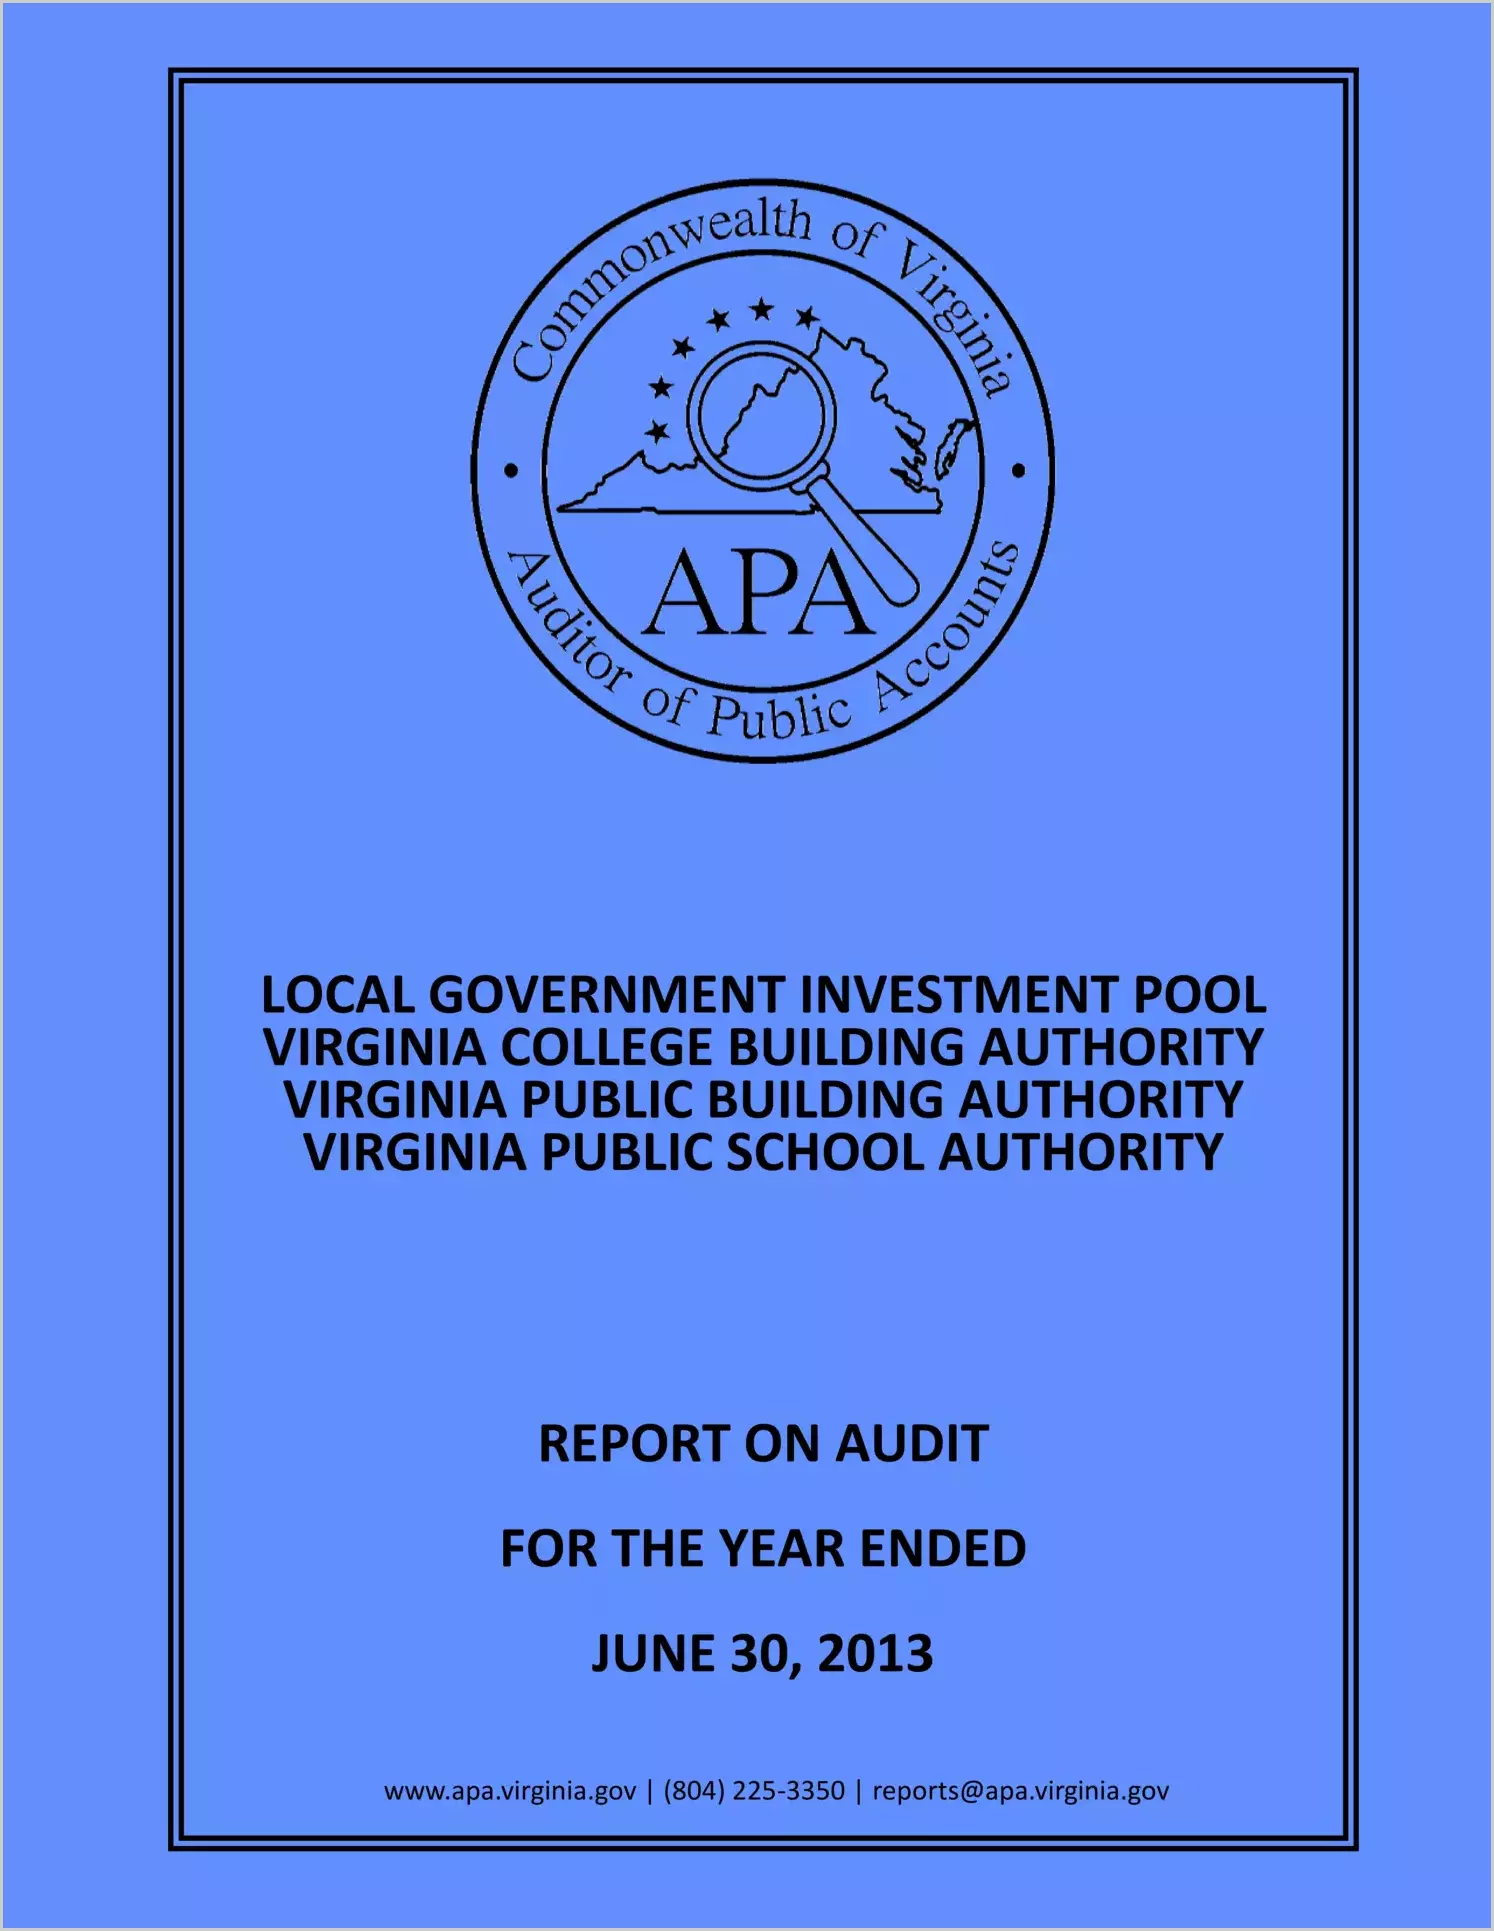 Local Government Investment Pool, Virginia College Building Authority, Virginia Public Building Authority, Virginia Public School Authority Report on Audit for Period Ended June 30, 2013